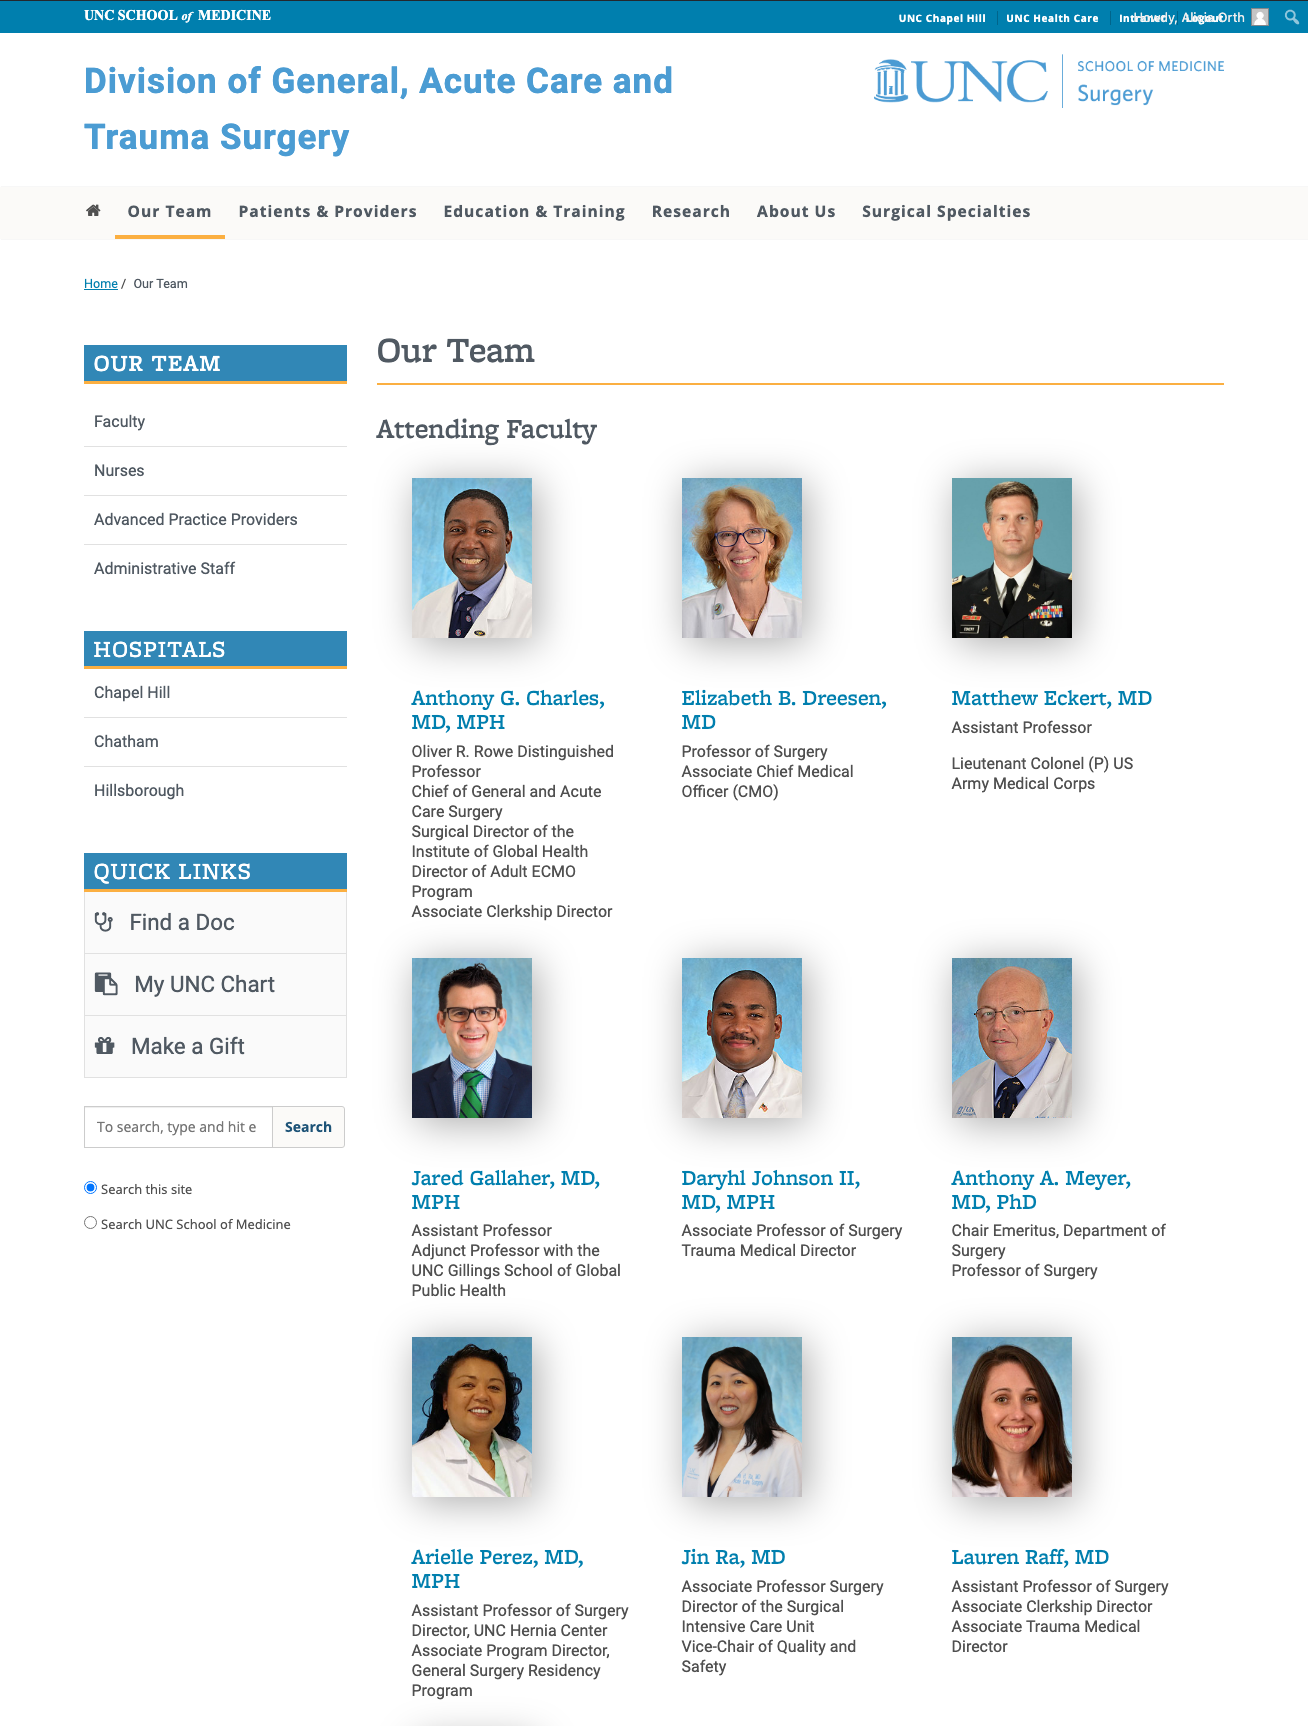 example directory gallery from the Division of General, Acute Care and Trauma Surgery